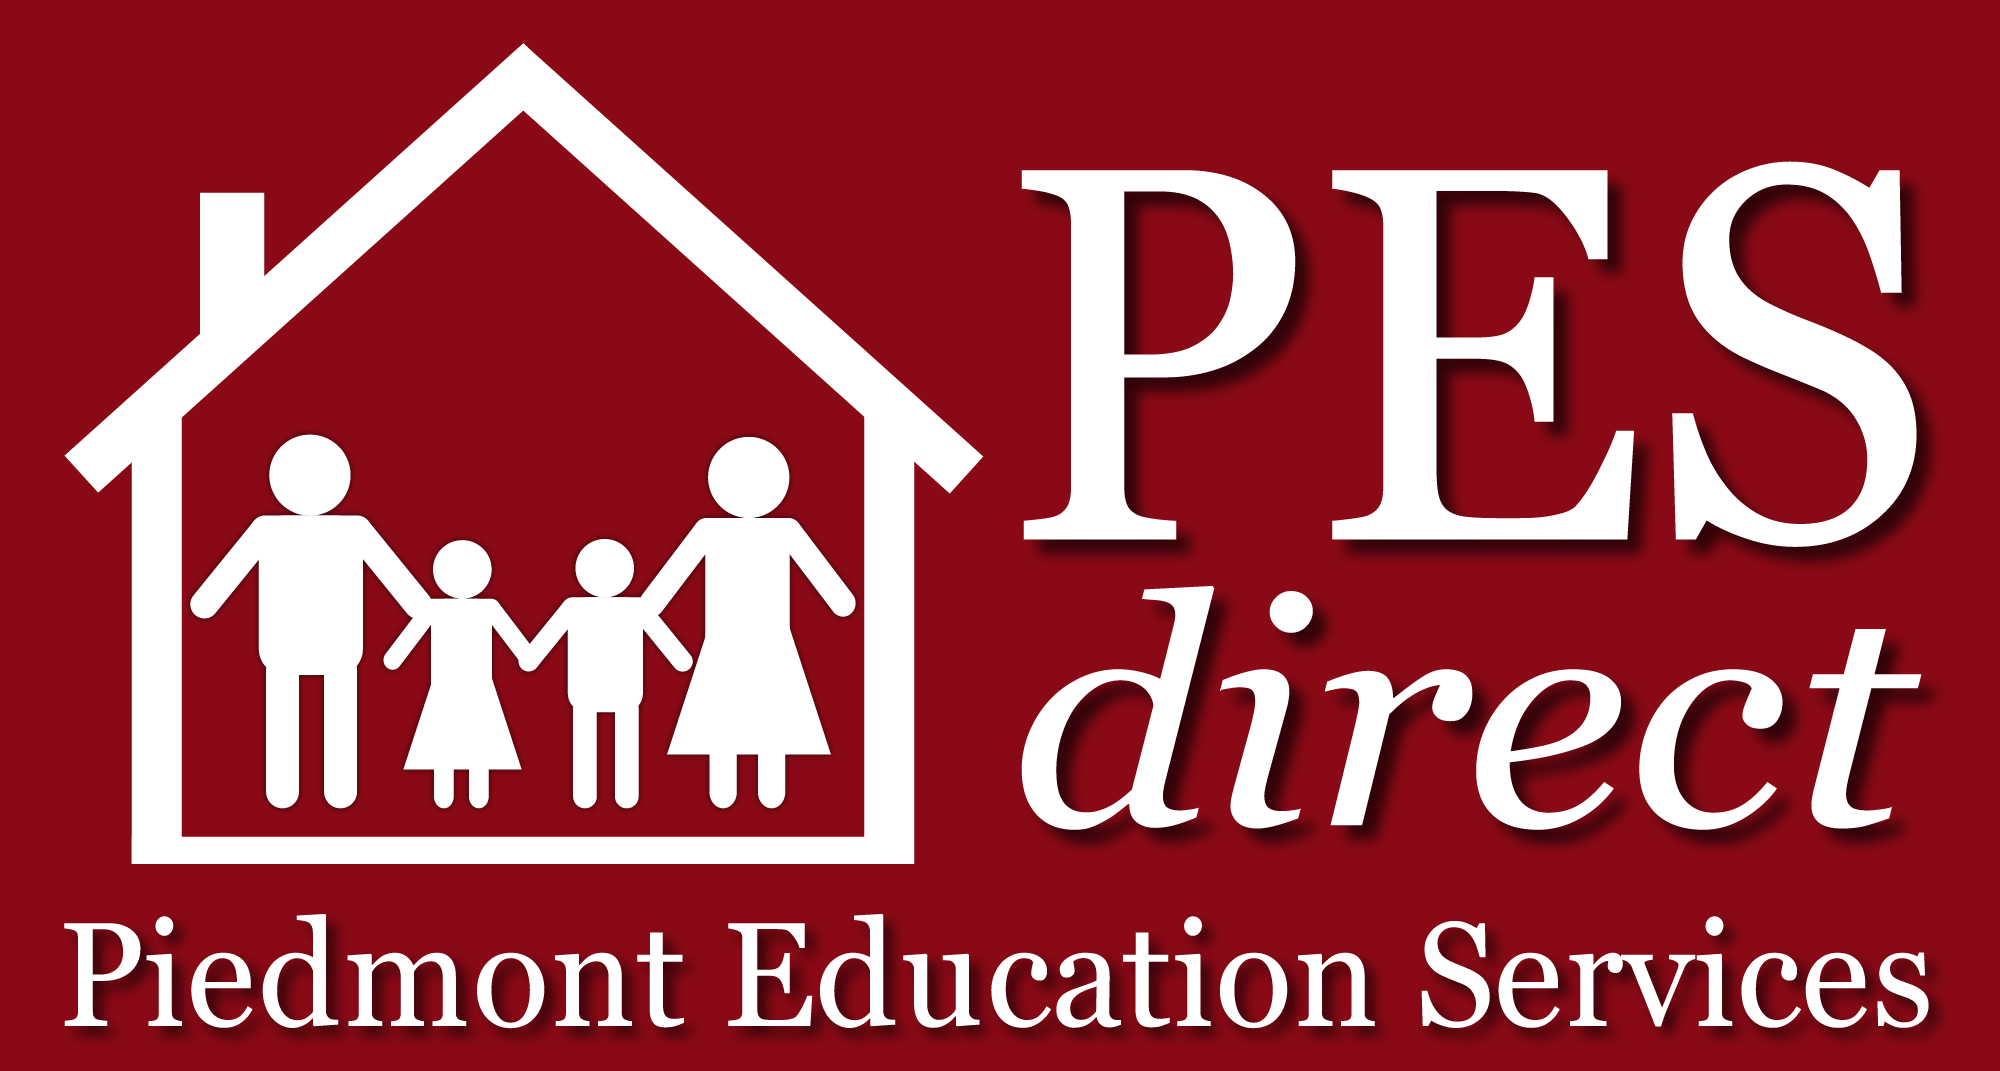 Piedmont Education Services is dedicated to strengthening and supporting families through Education, Products, and Services: Natioanlly standardized Tests, Practice Tests, Educational Books, DVDs, and other important homeschool and educational resources.